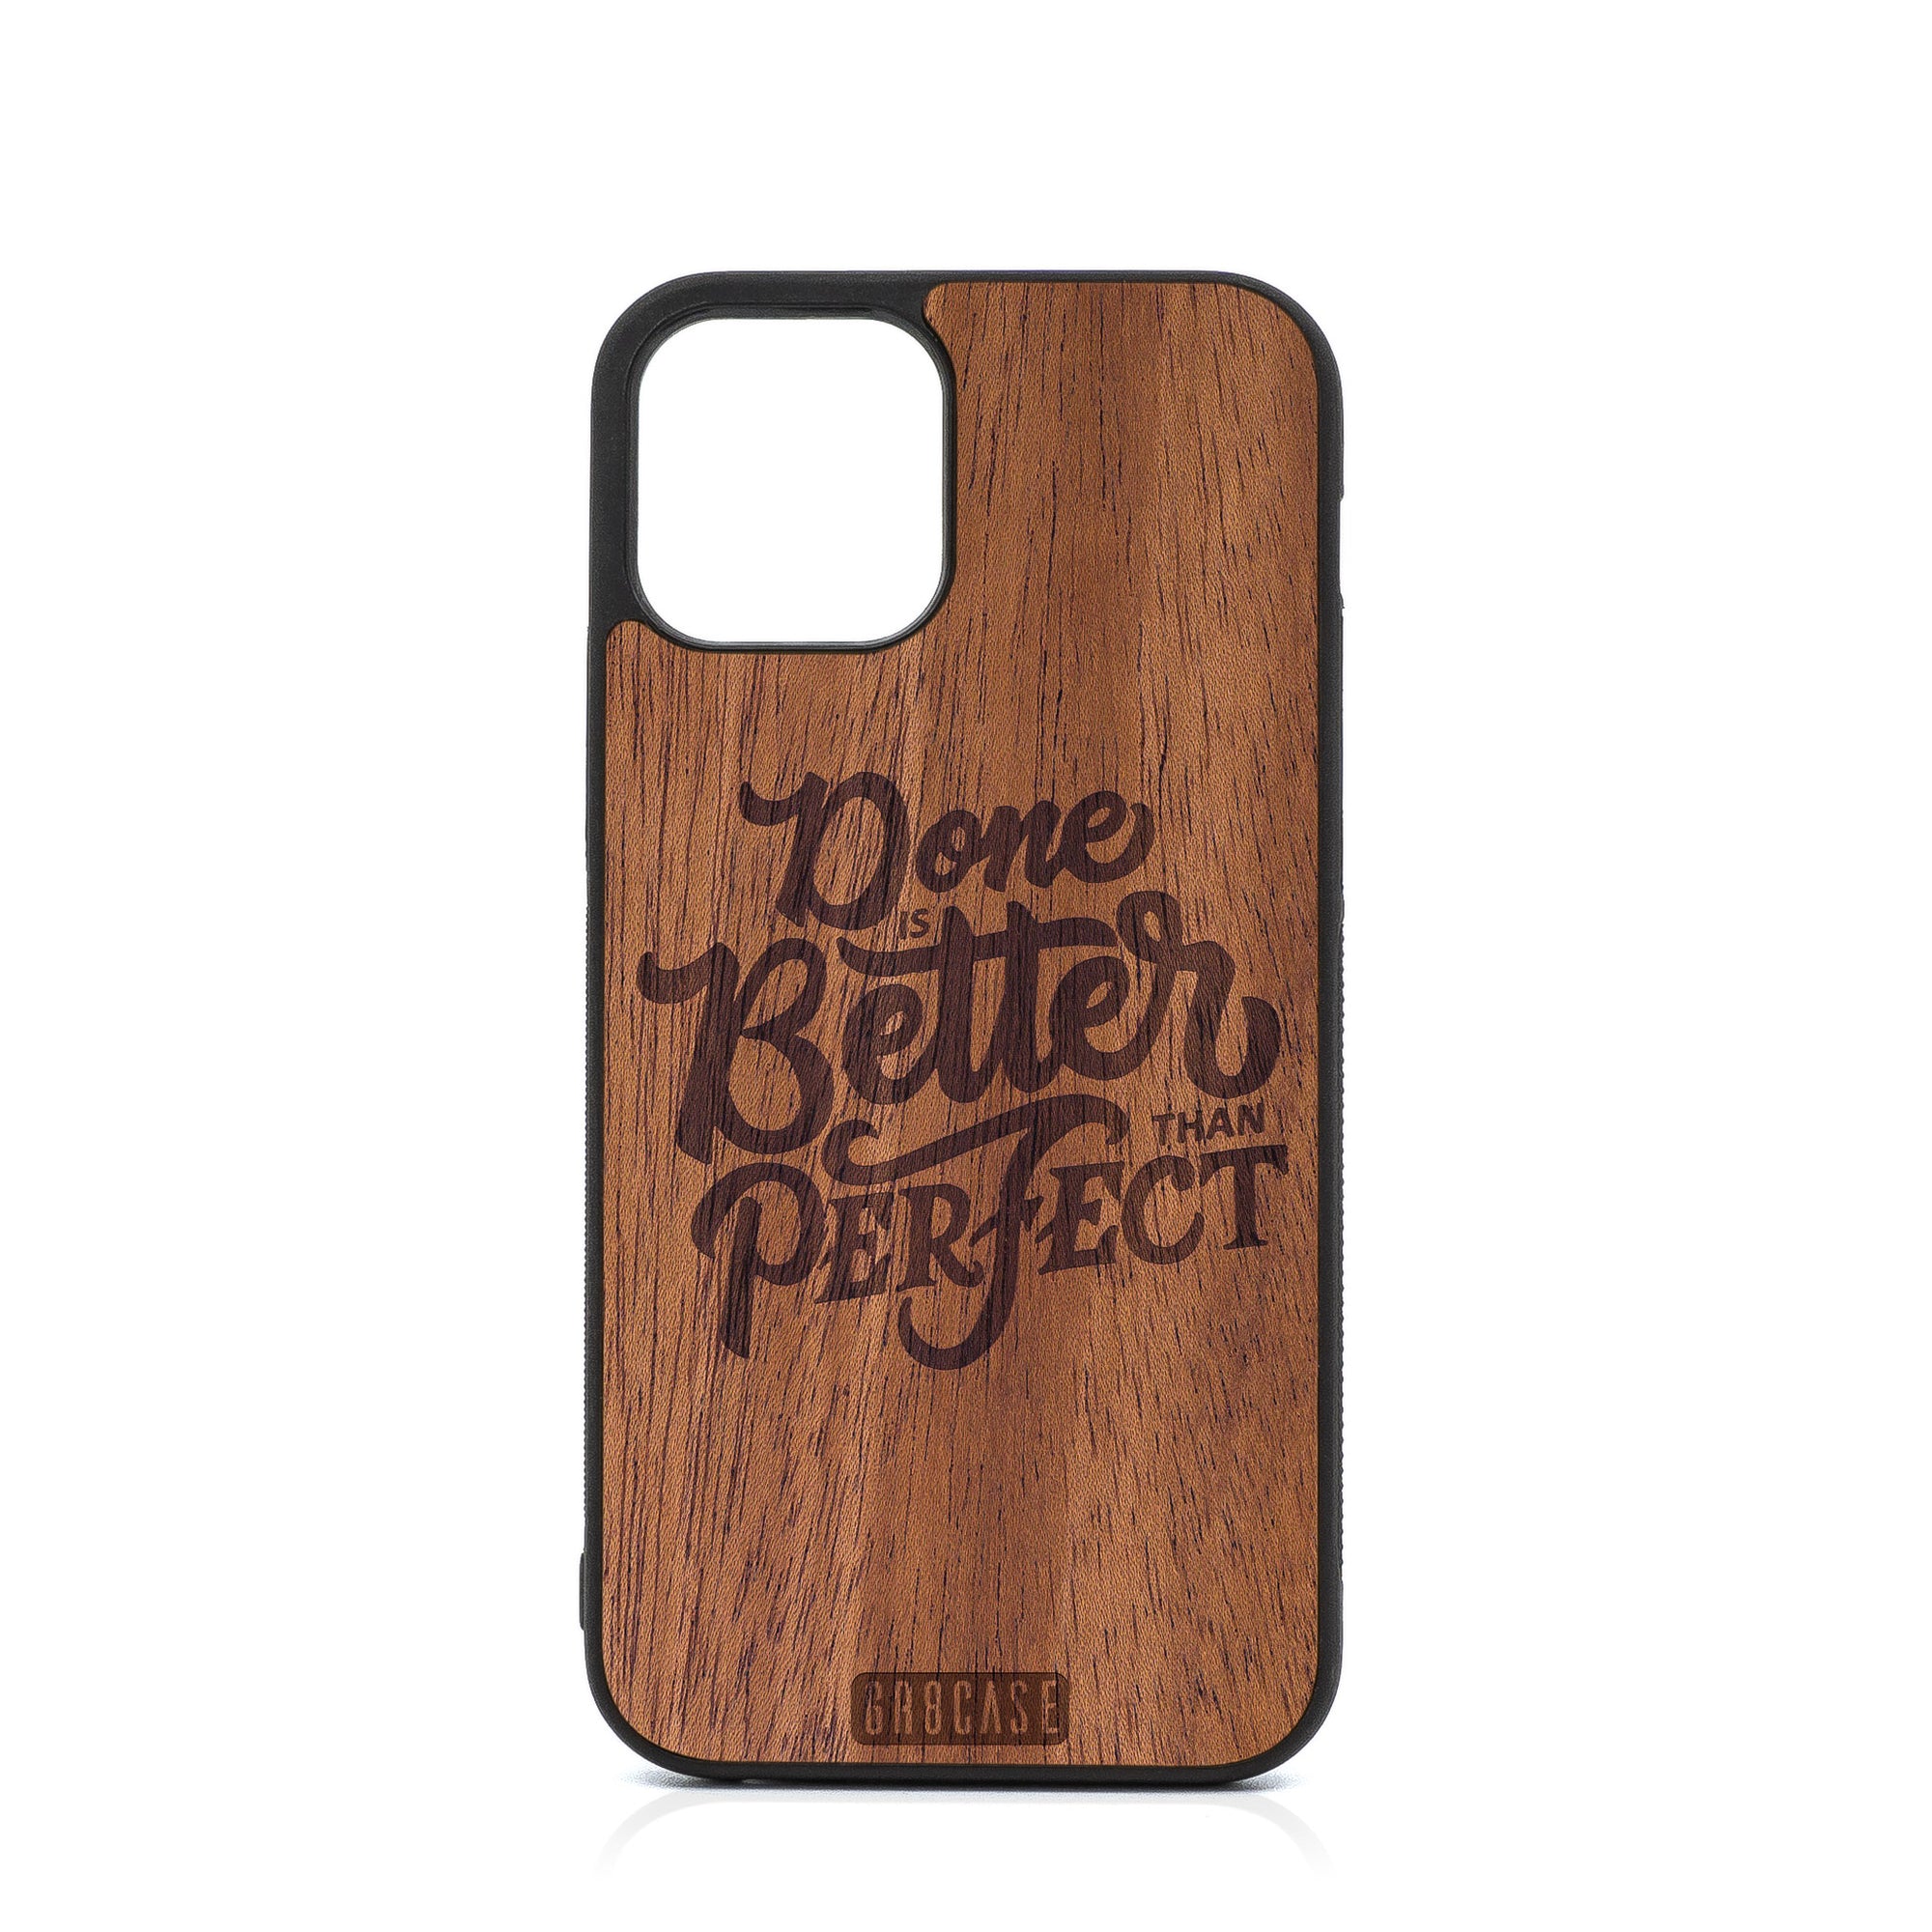 Done Is Better Than Perfect Design Wood Case For iPhone 12 Pro